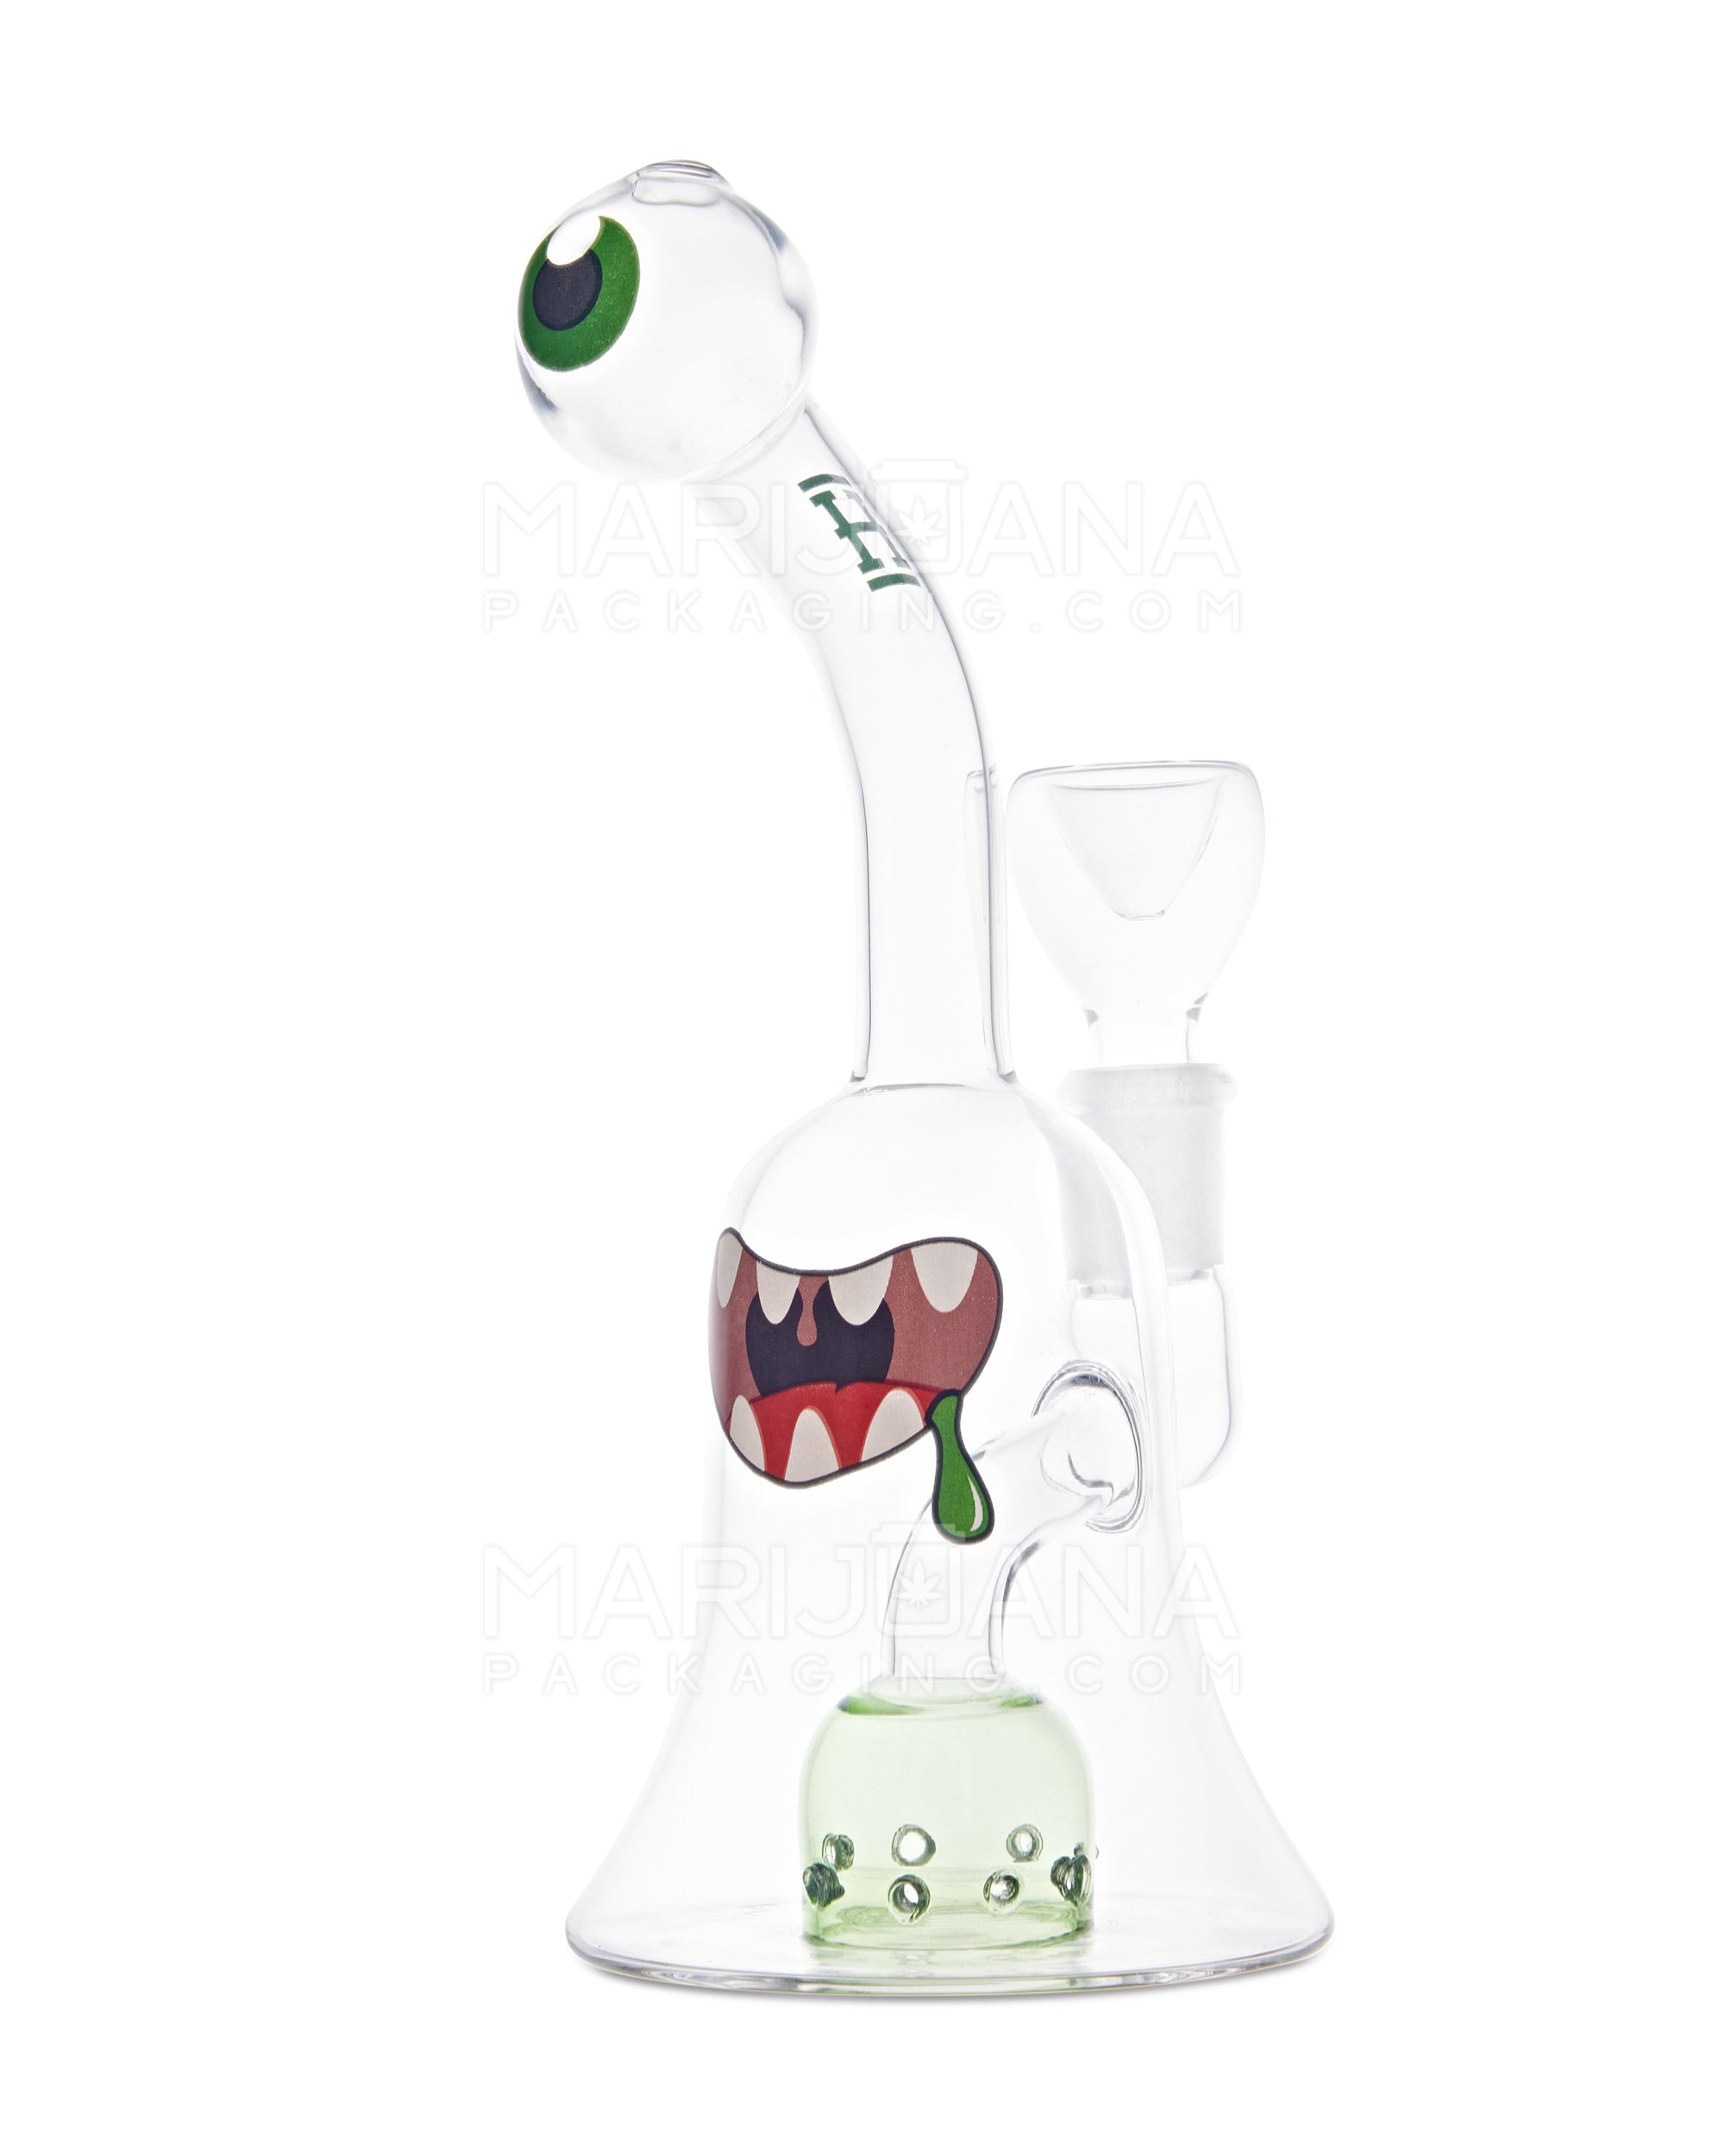 HEMPER | HiClops Monster Glass Water Pipe | 7.5in Tall - 14mm Bowl - Assorted